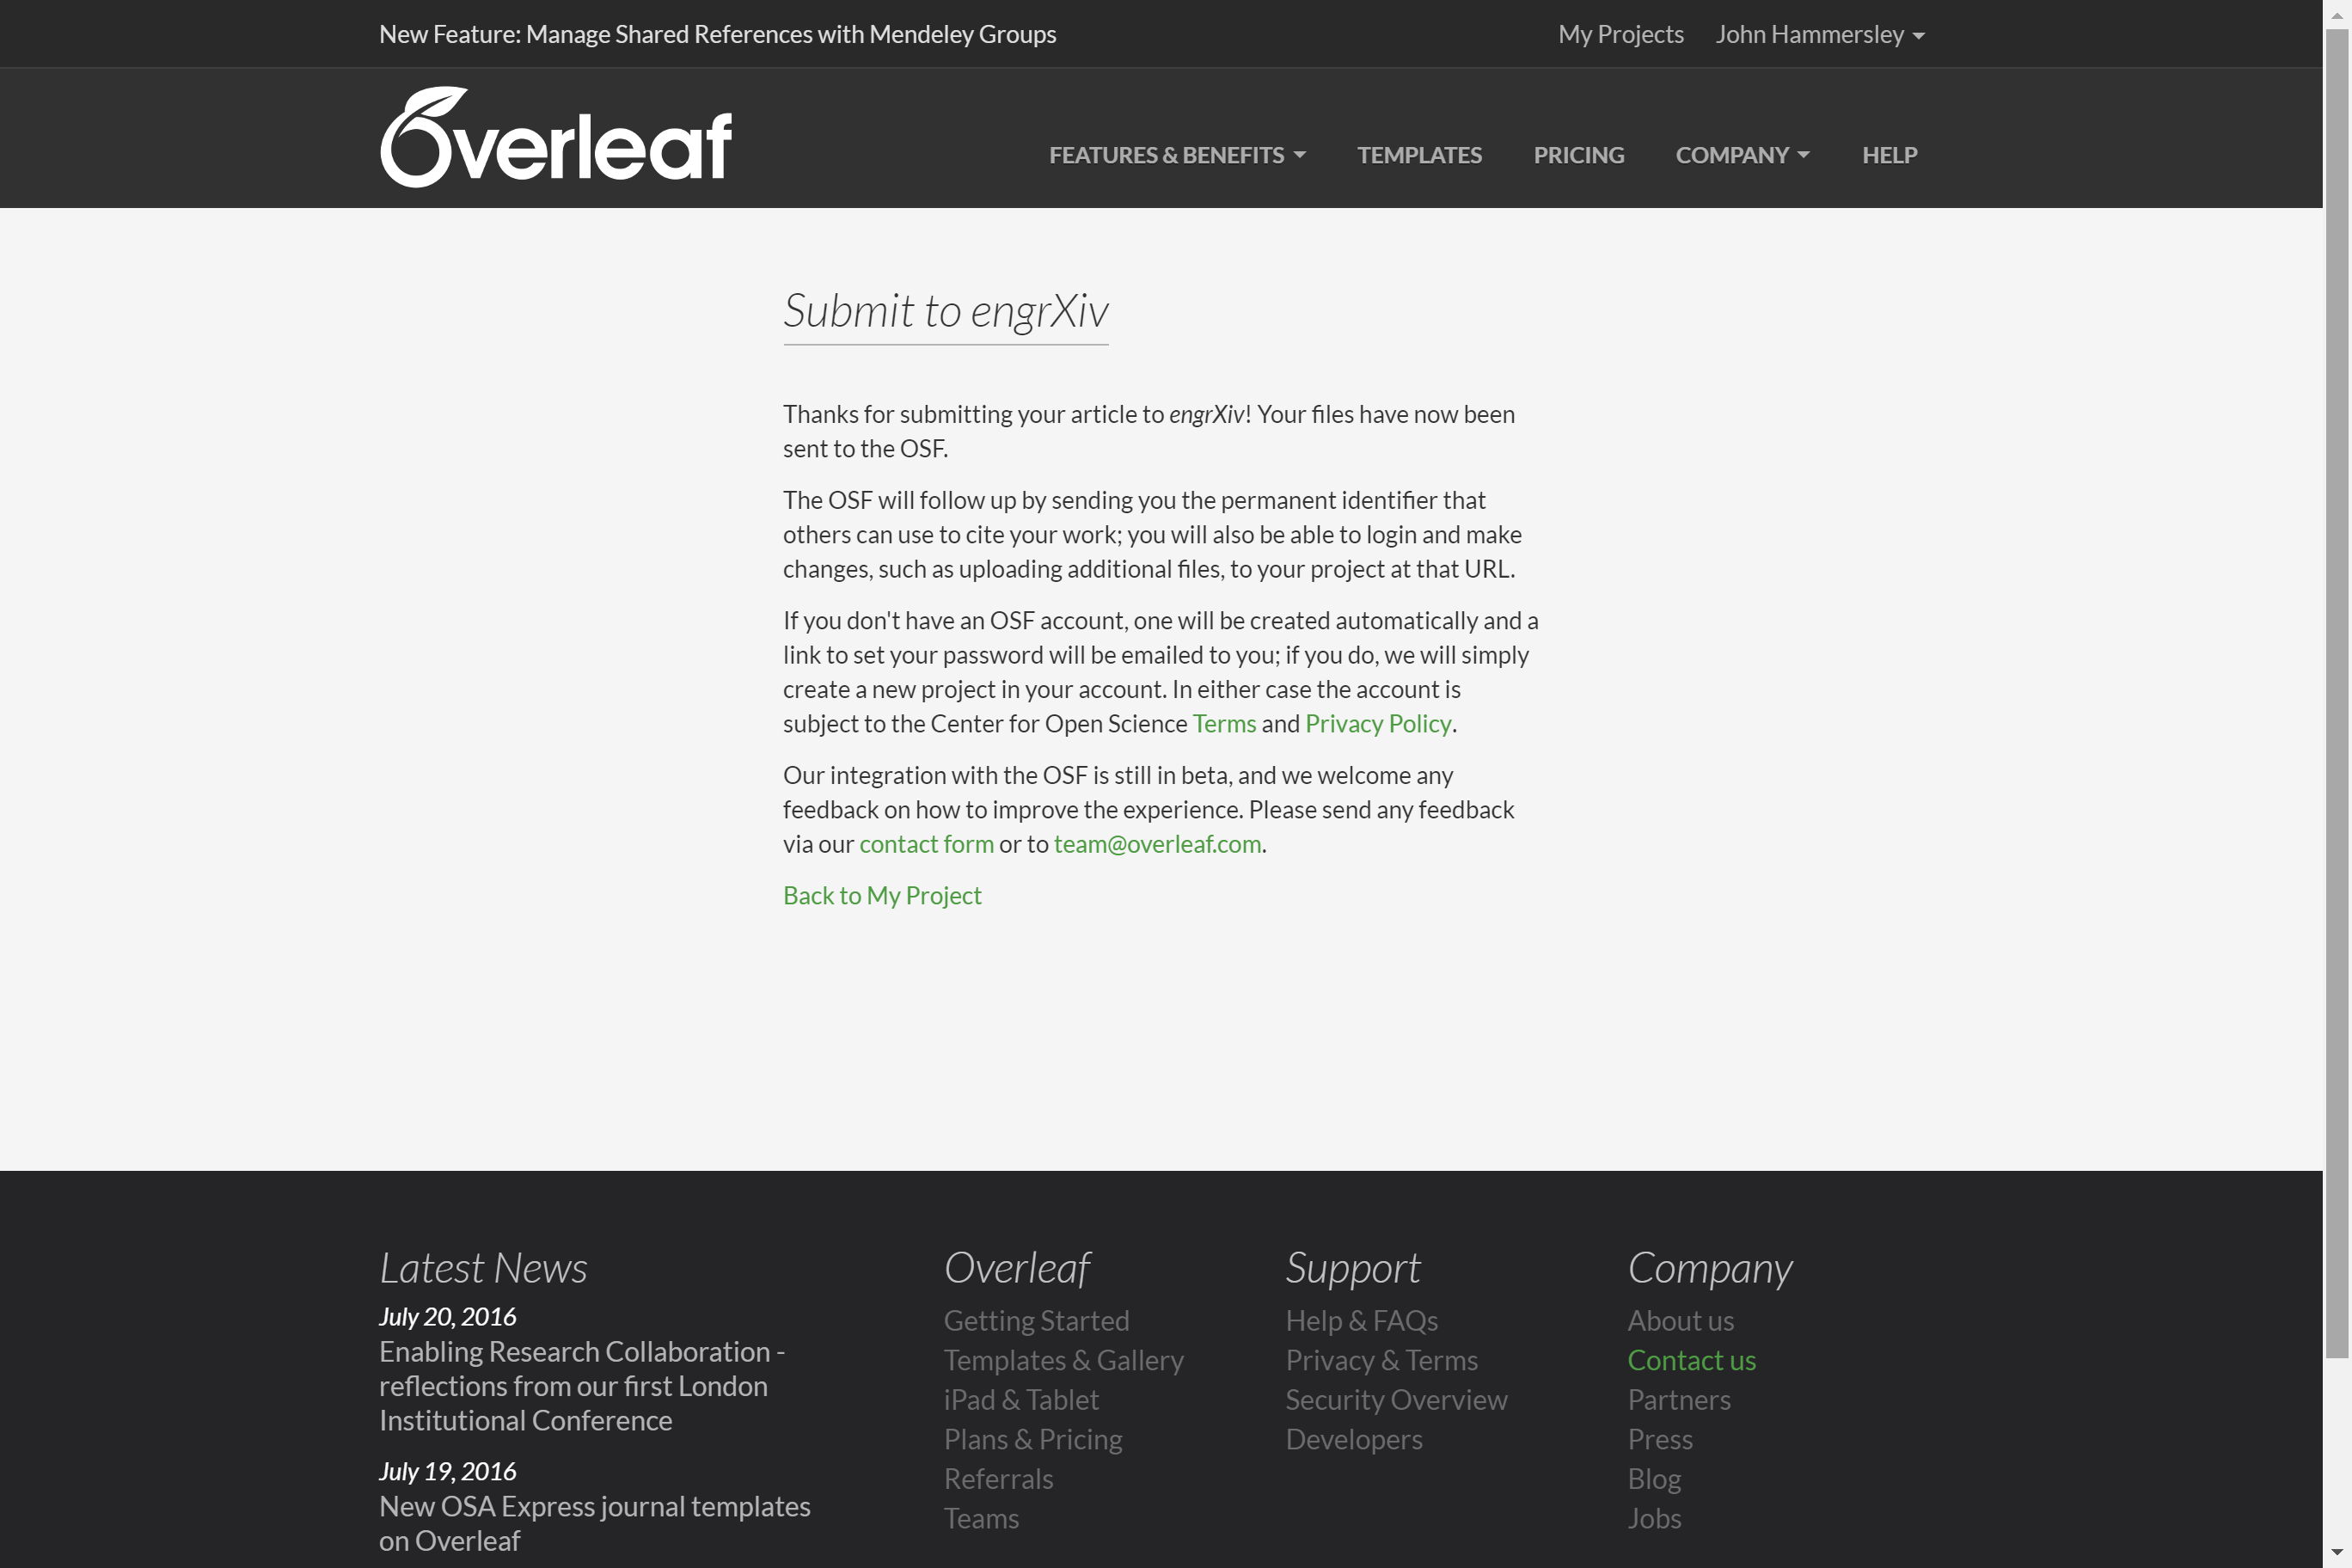 submitted-to-engrxiv-via-overleaf.png